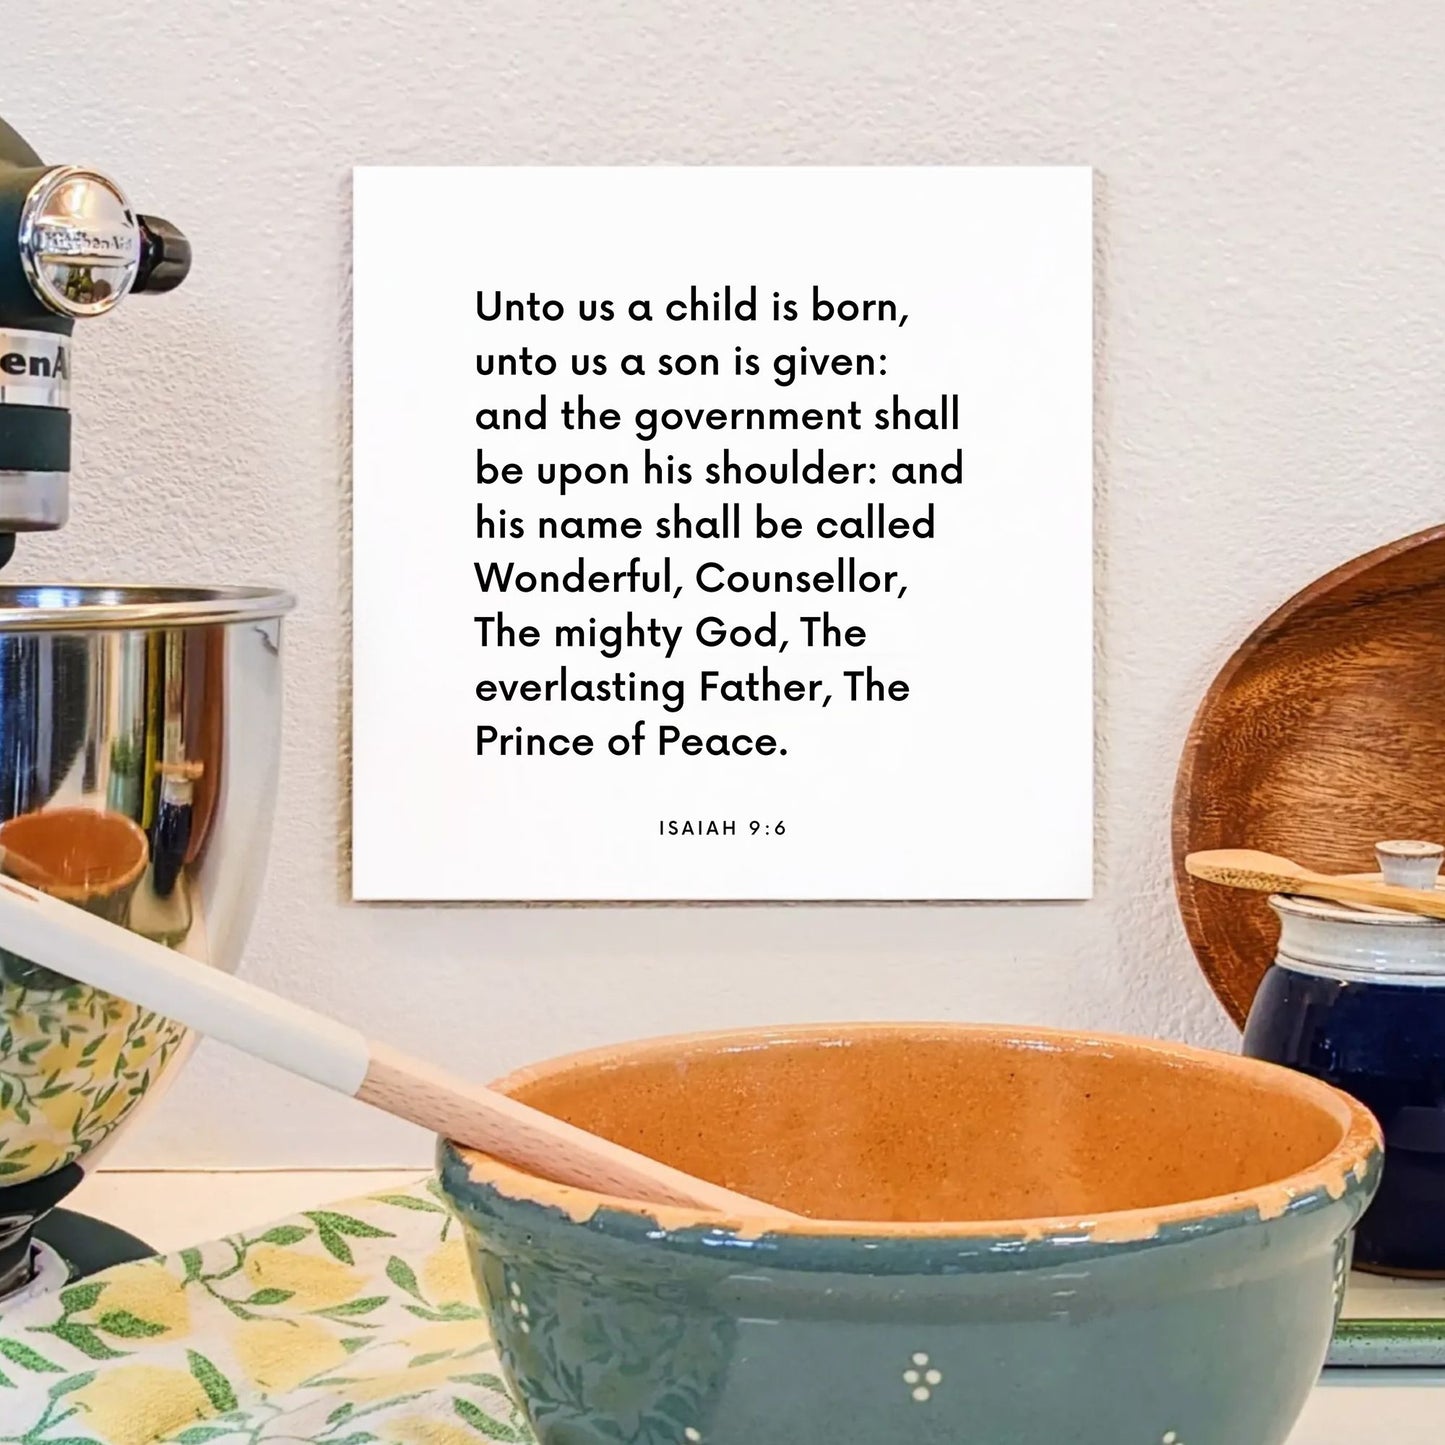 Kitchen mouting of the scripture tile for Isaiah 9:6 - "Unto us a child is born, unto us a son is given"